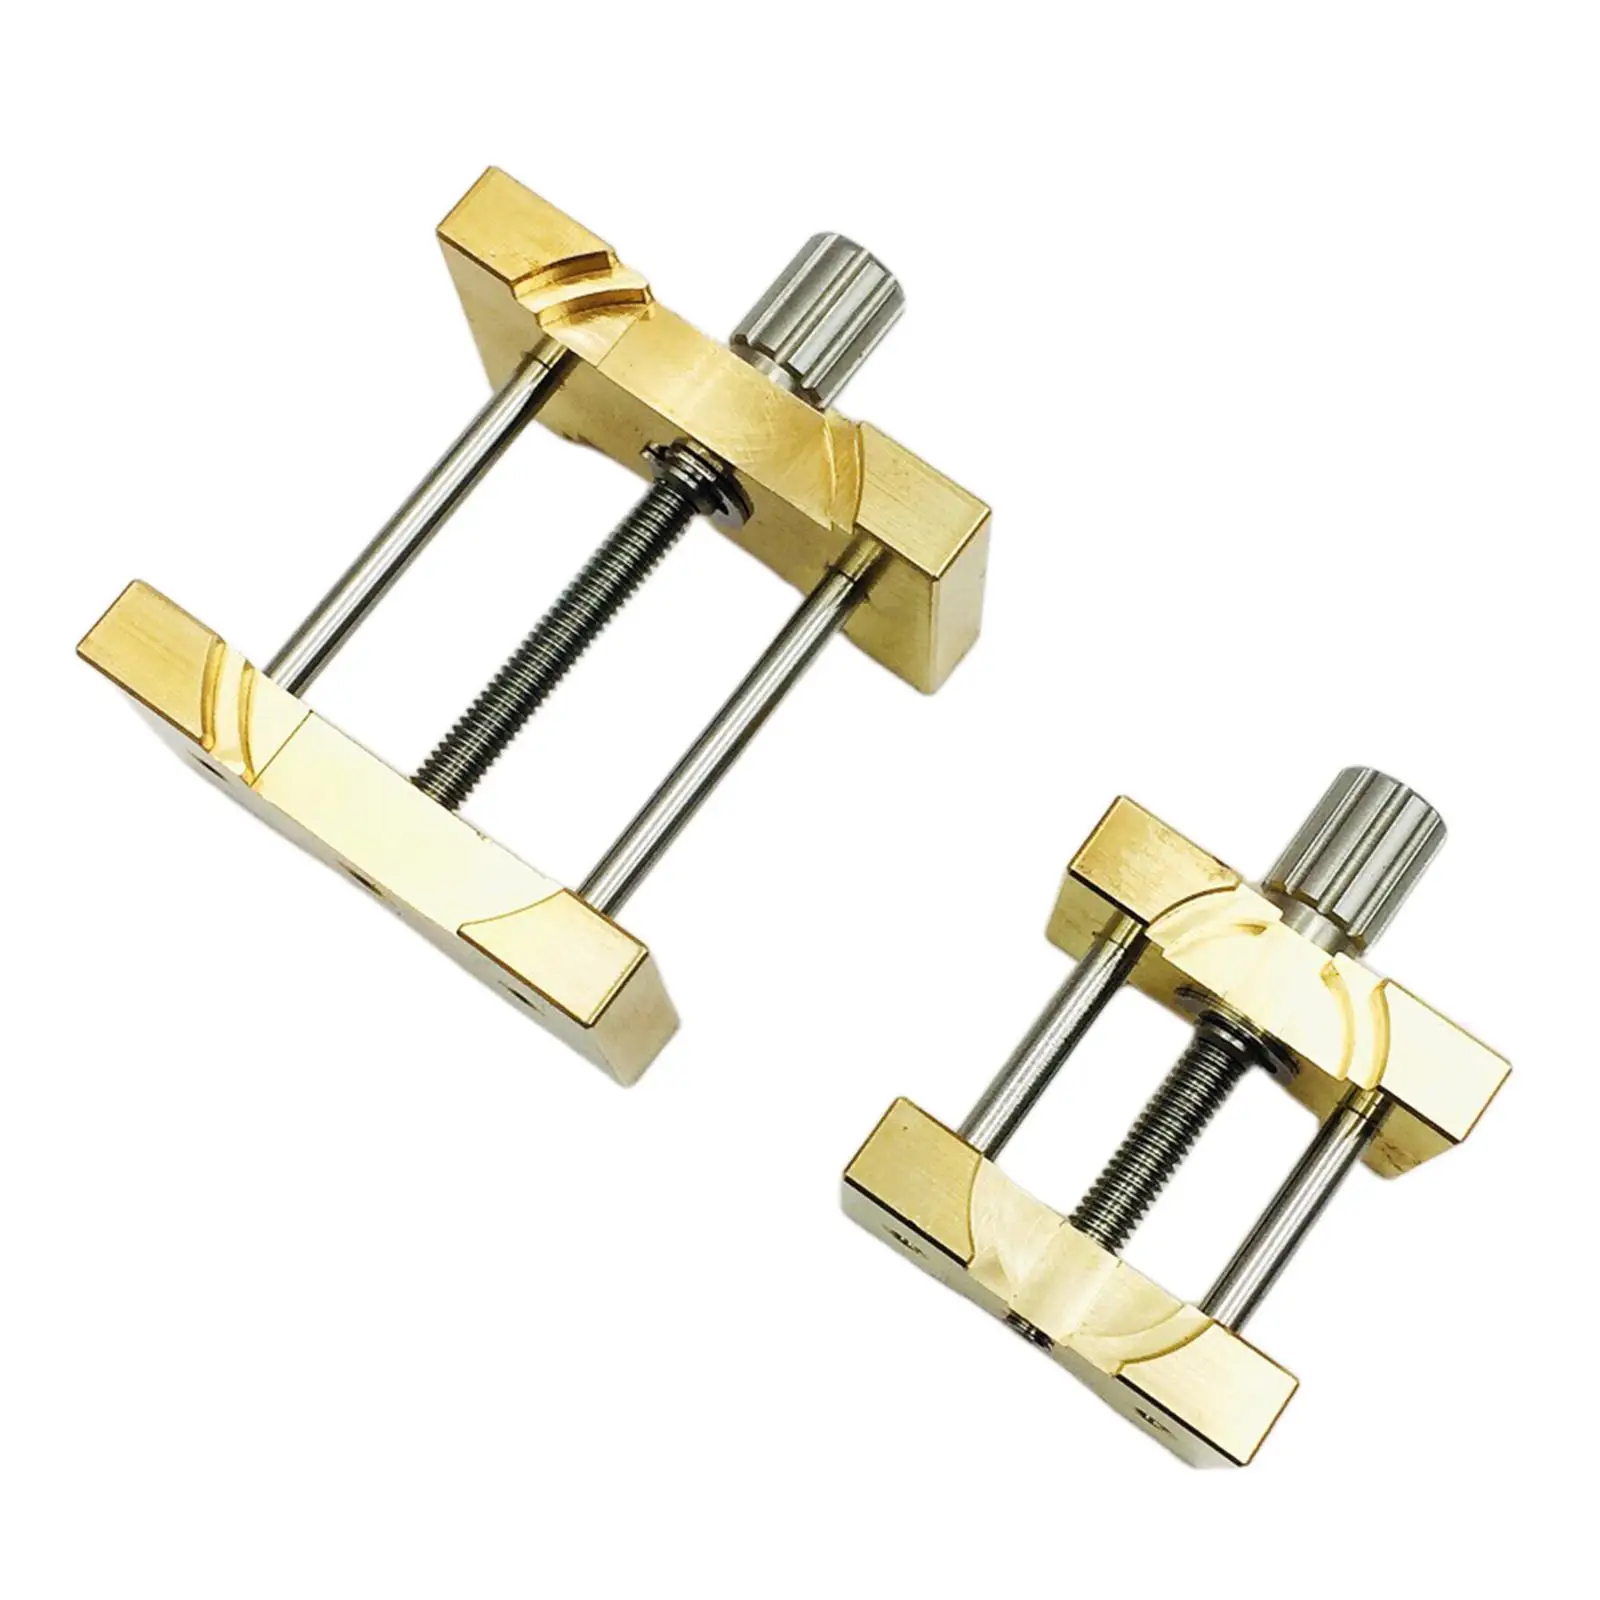 Set of  Copper Watch Movement Holder Fixed Base Opening Holder, Easy to use,Professional